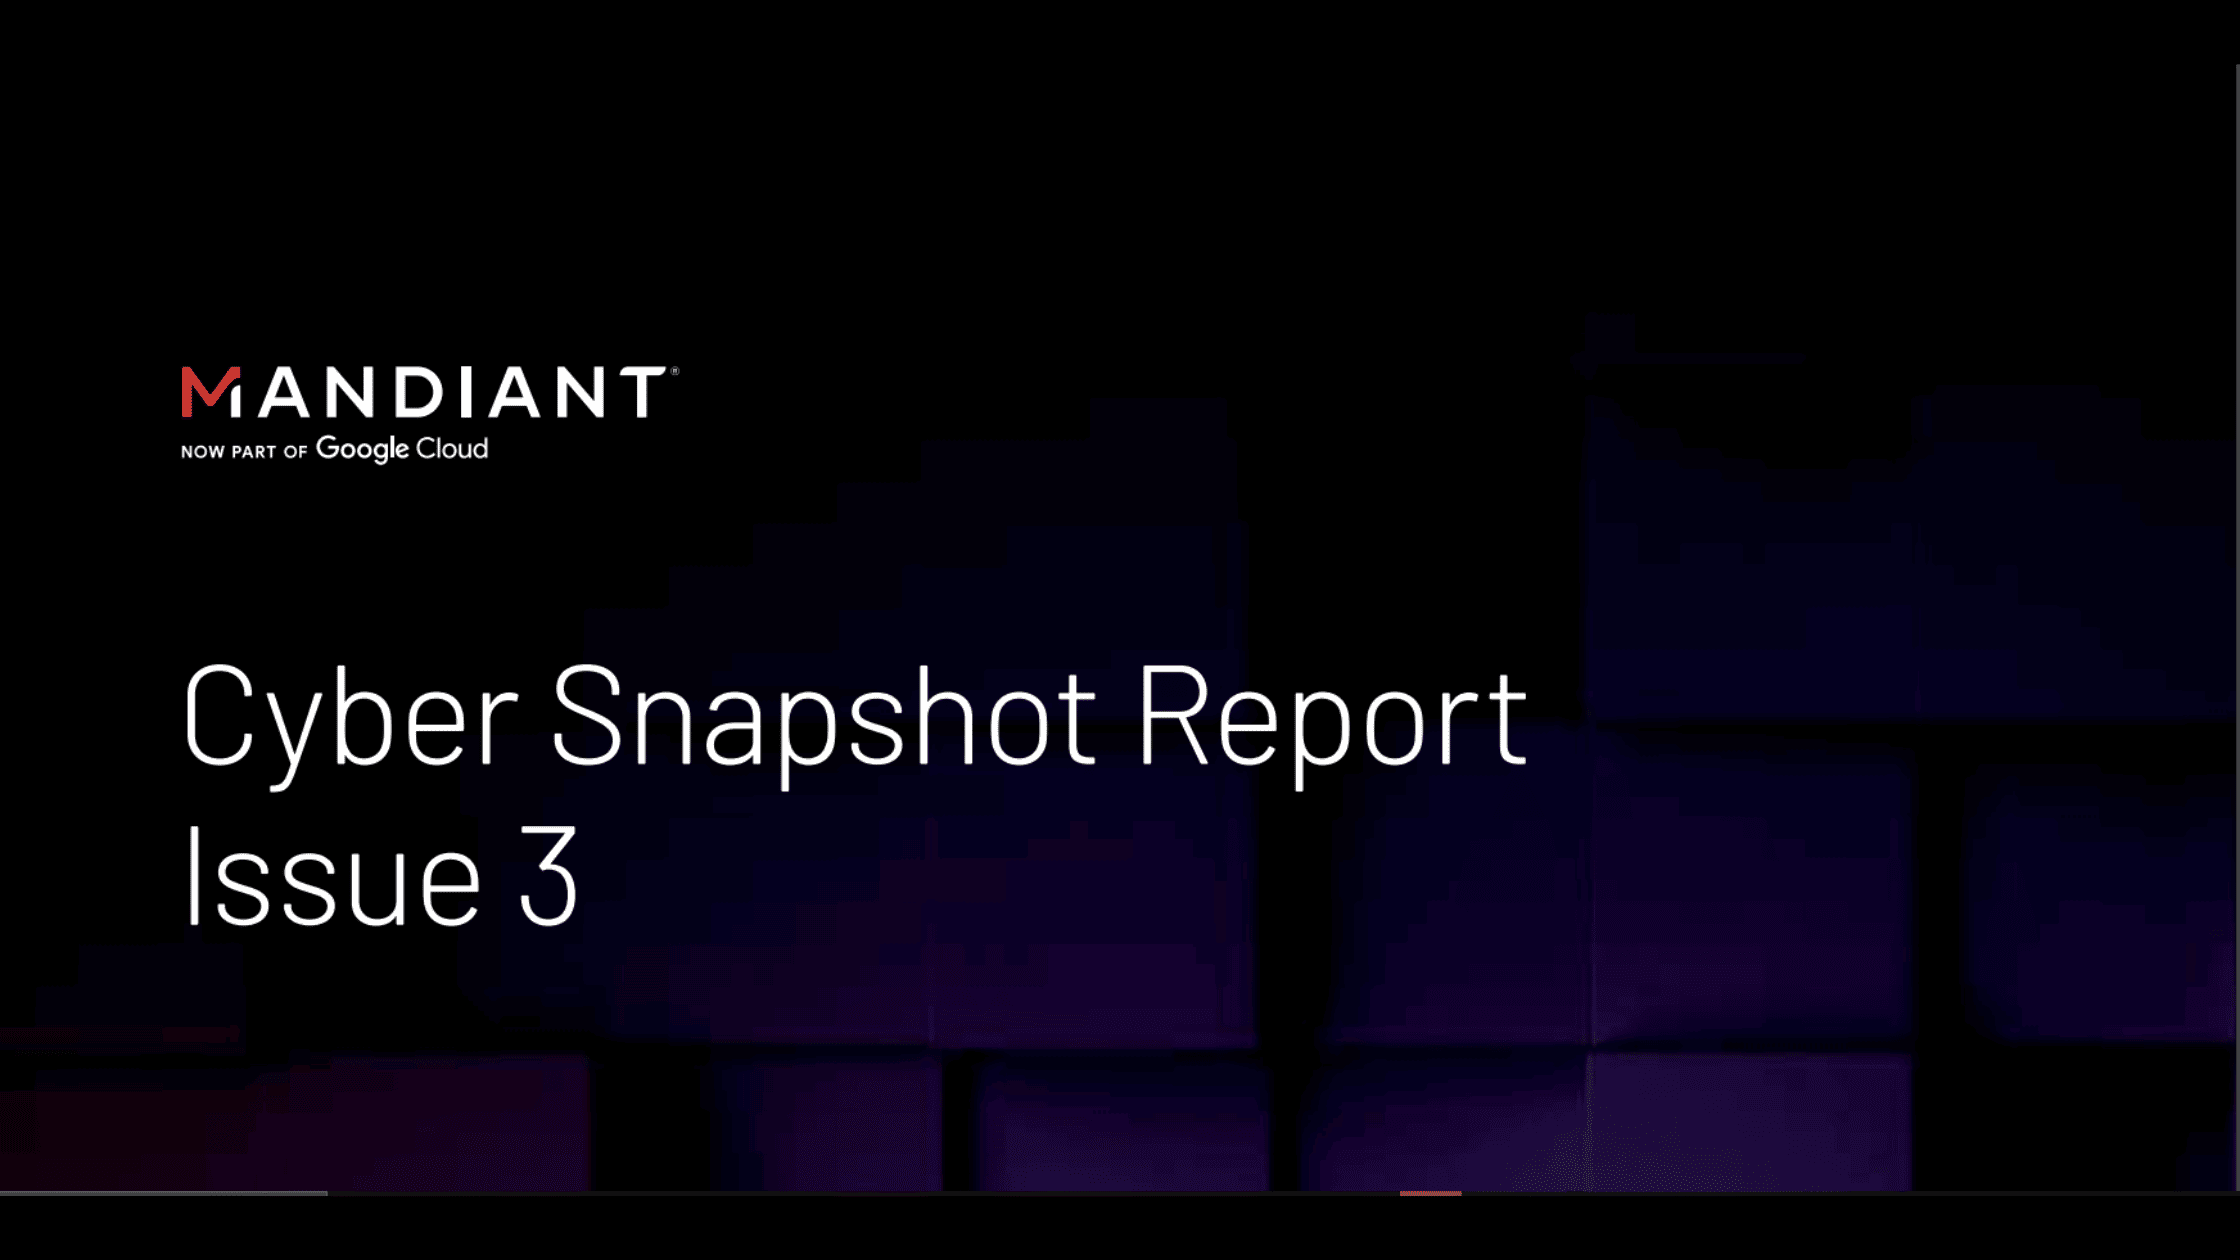 What Is There In The Mandiants Defenders Advantage Cyber Snapshot Report Issue 3